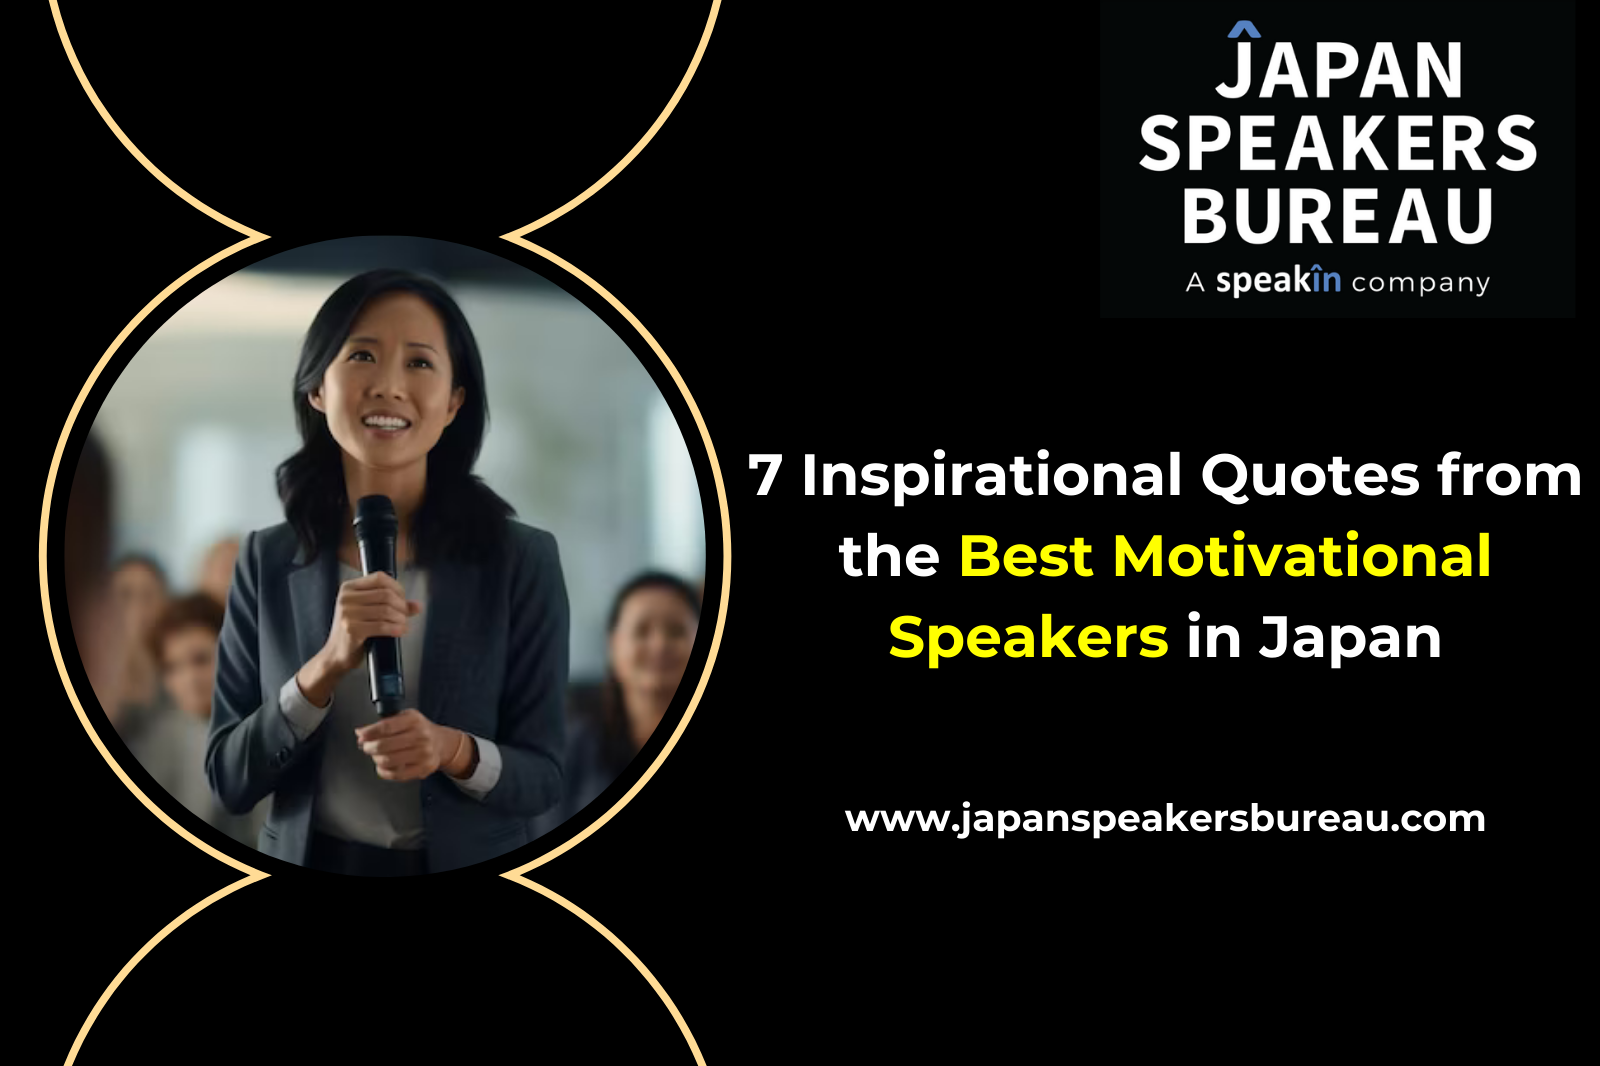 7 Inspirational Quotes from the Best Motivational Speakers in Japan